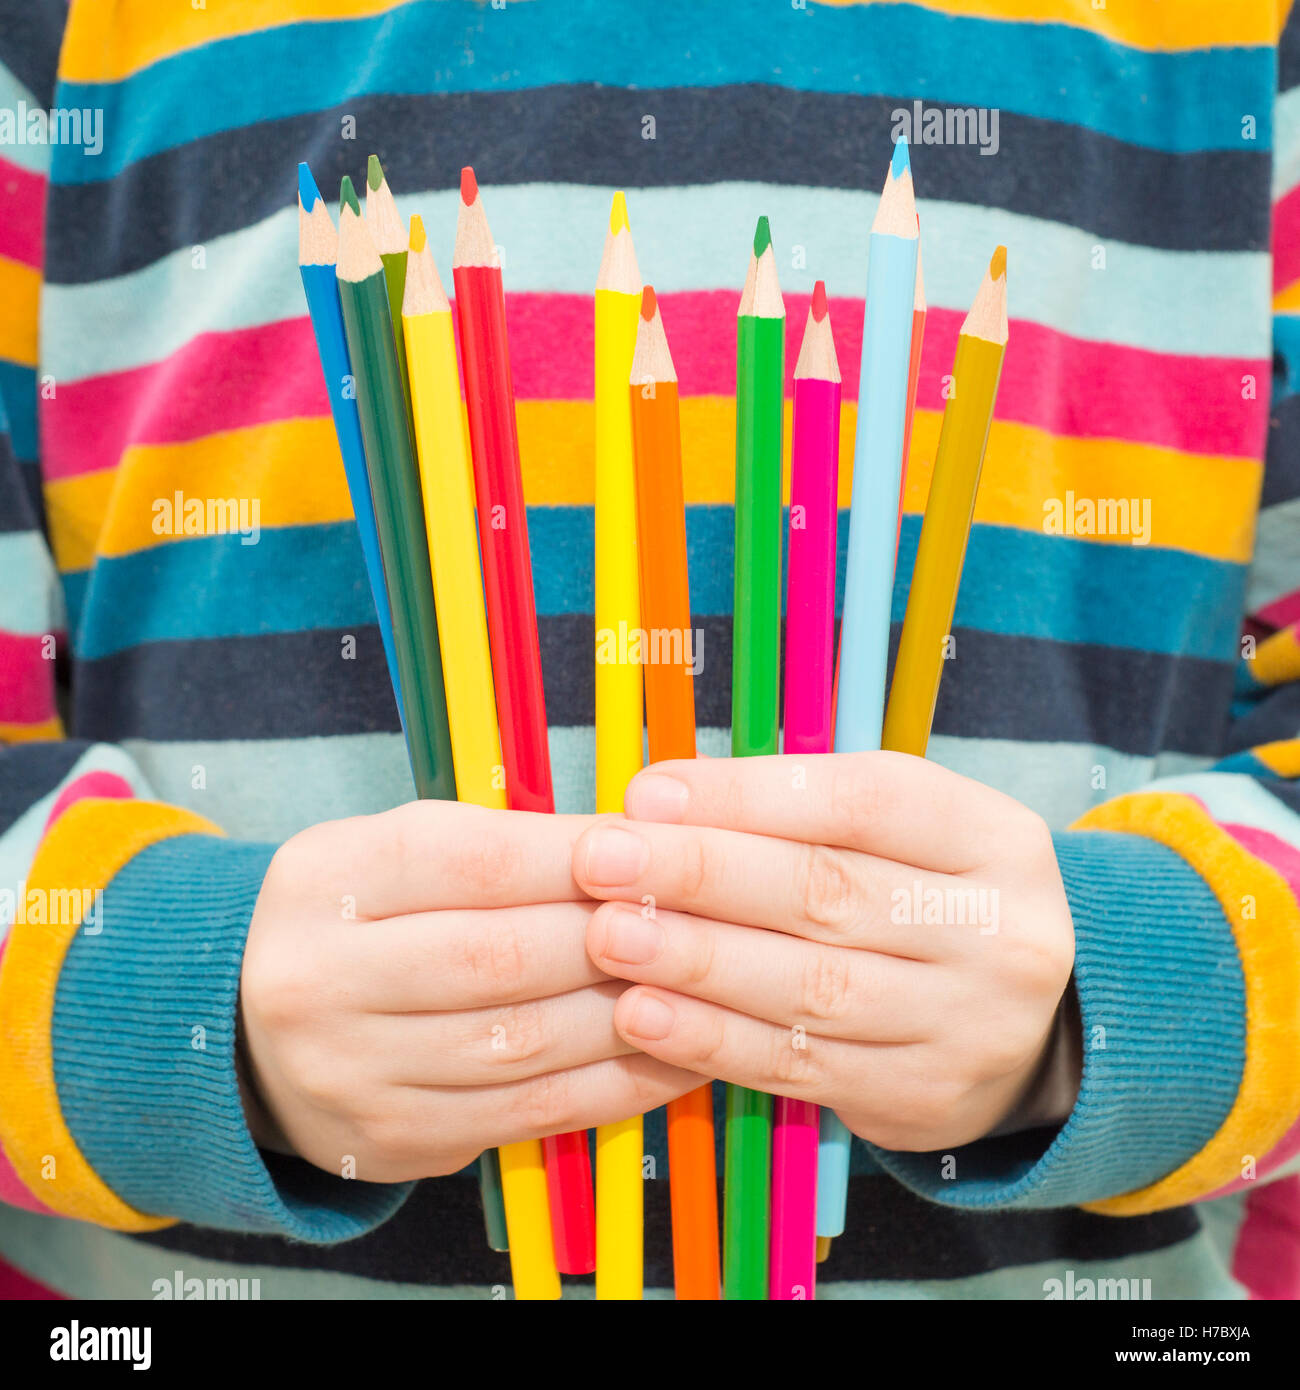 Child hands holding colorful pencils. Concept of childhood creativity, drawing and fun education. Stock Photo